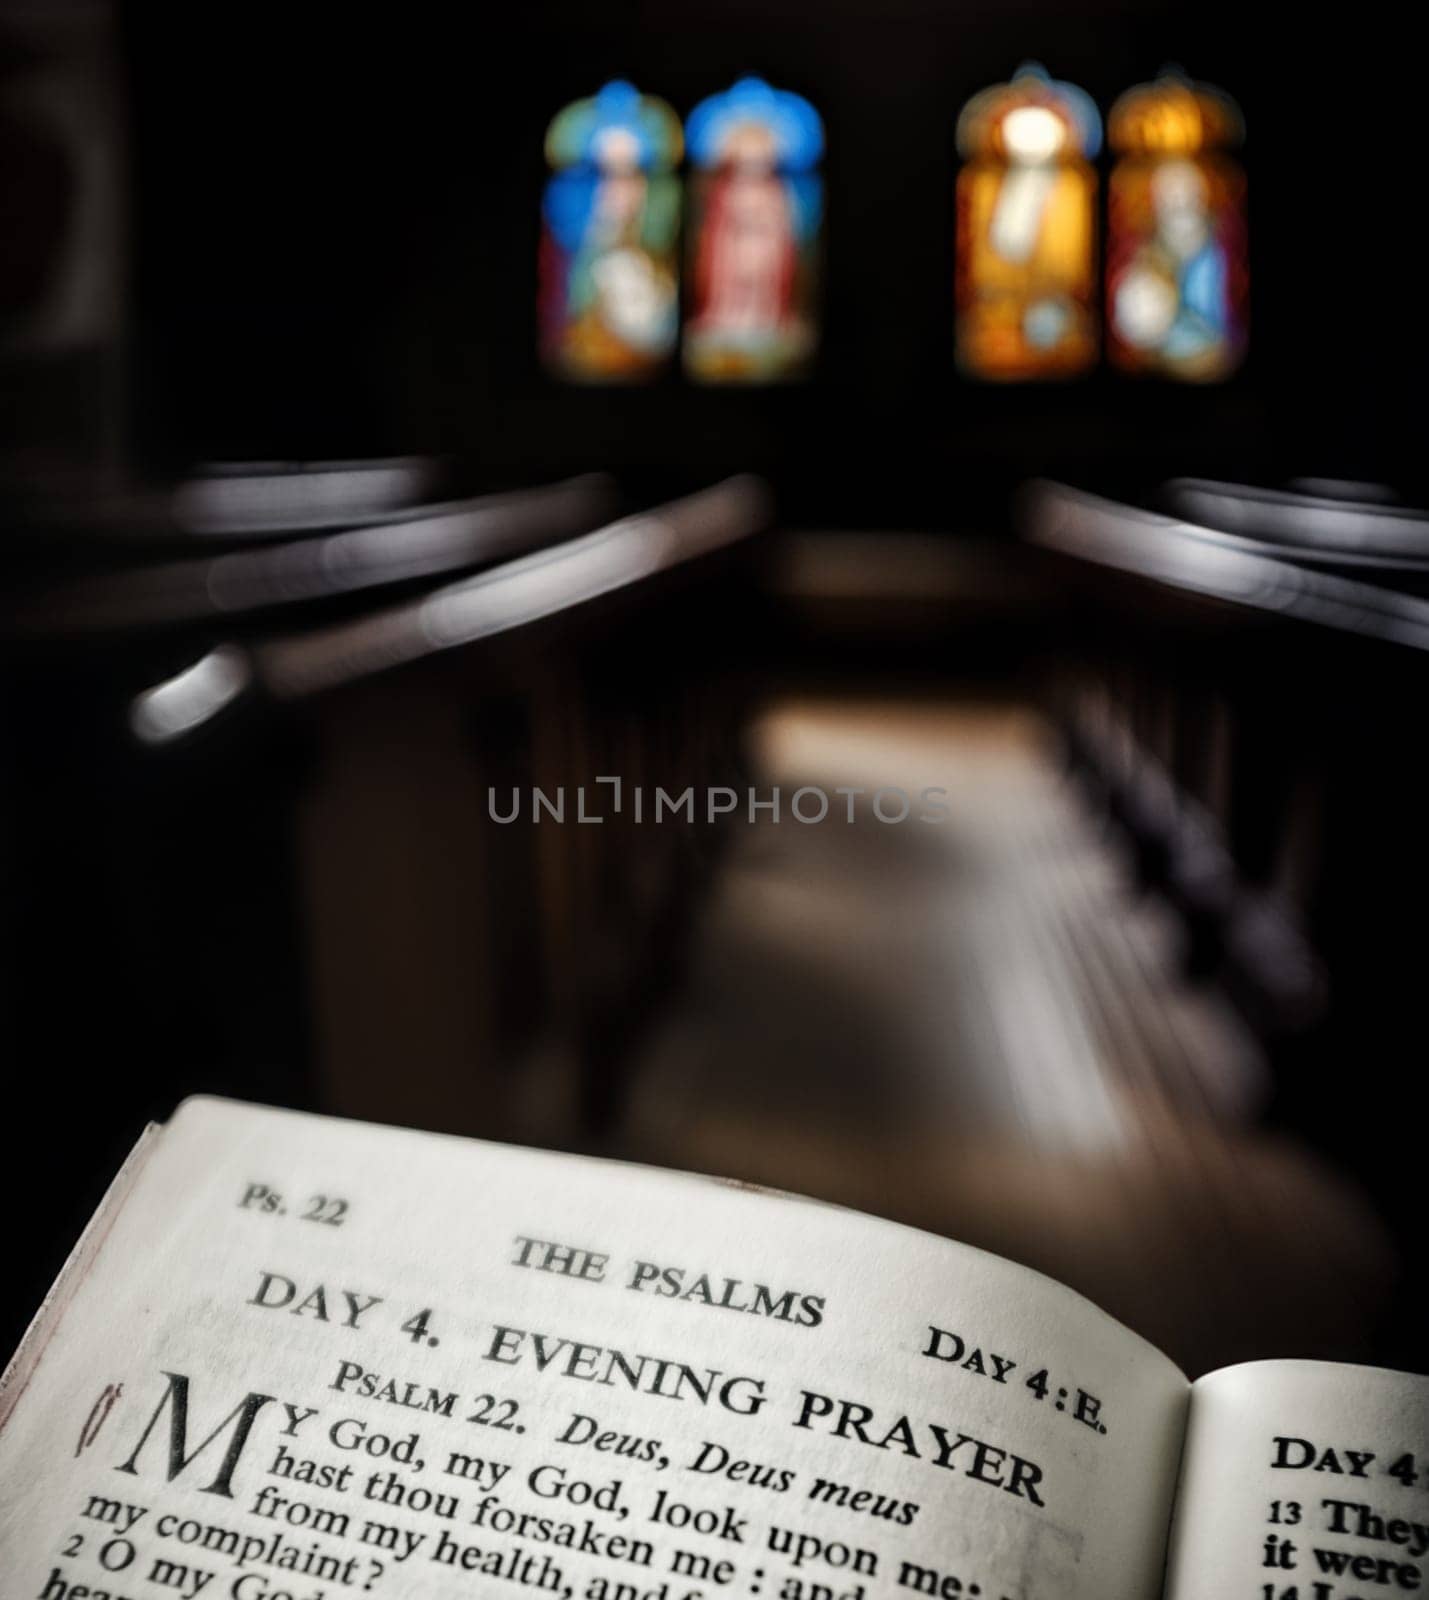 Evening Prayer Book In A Chapel Or Church, With Copy Space